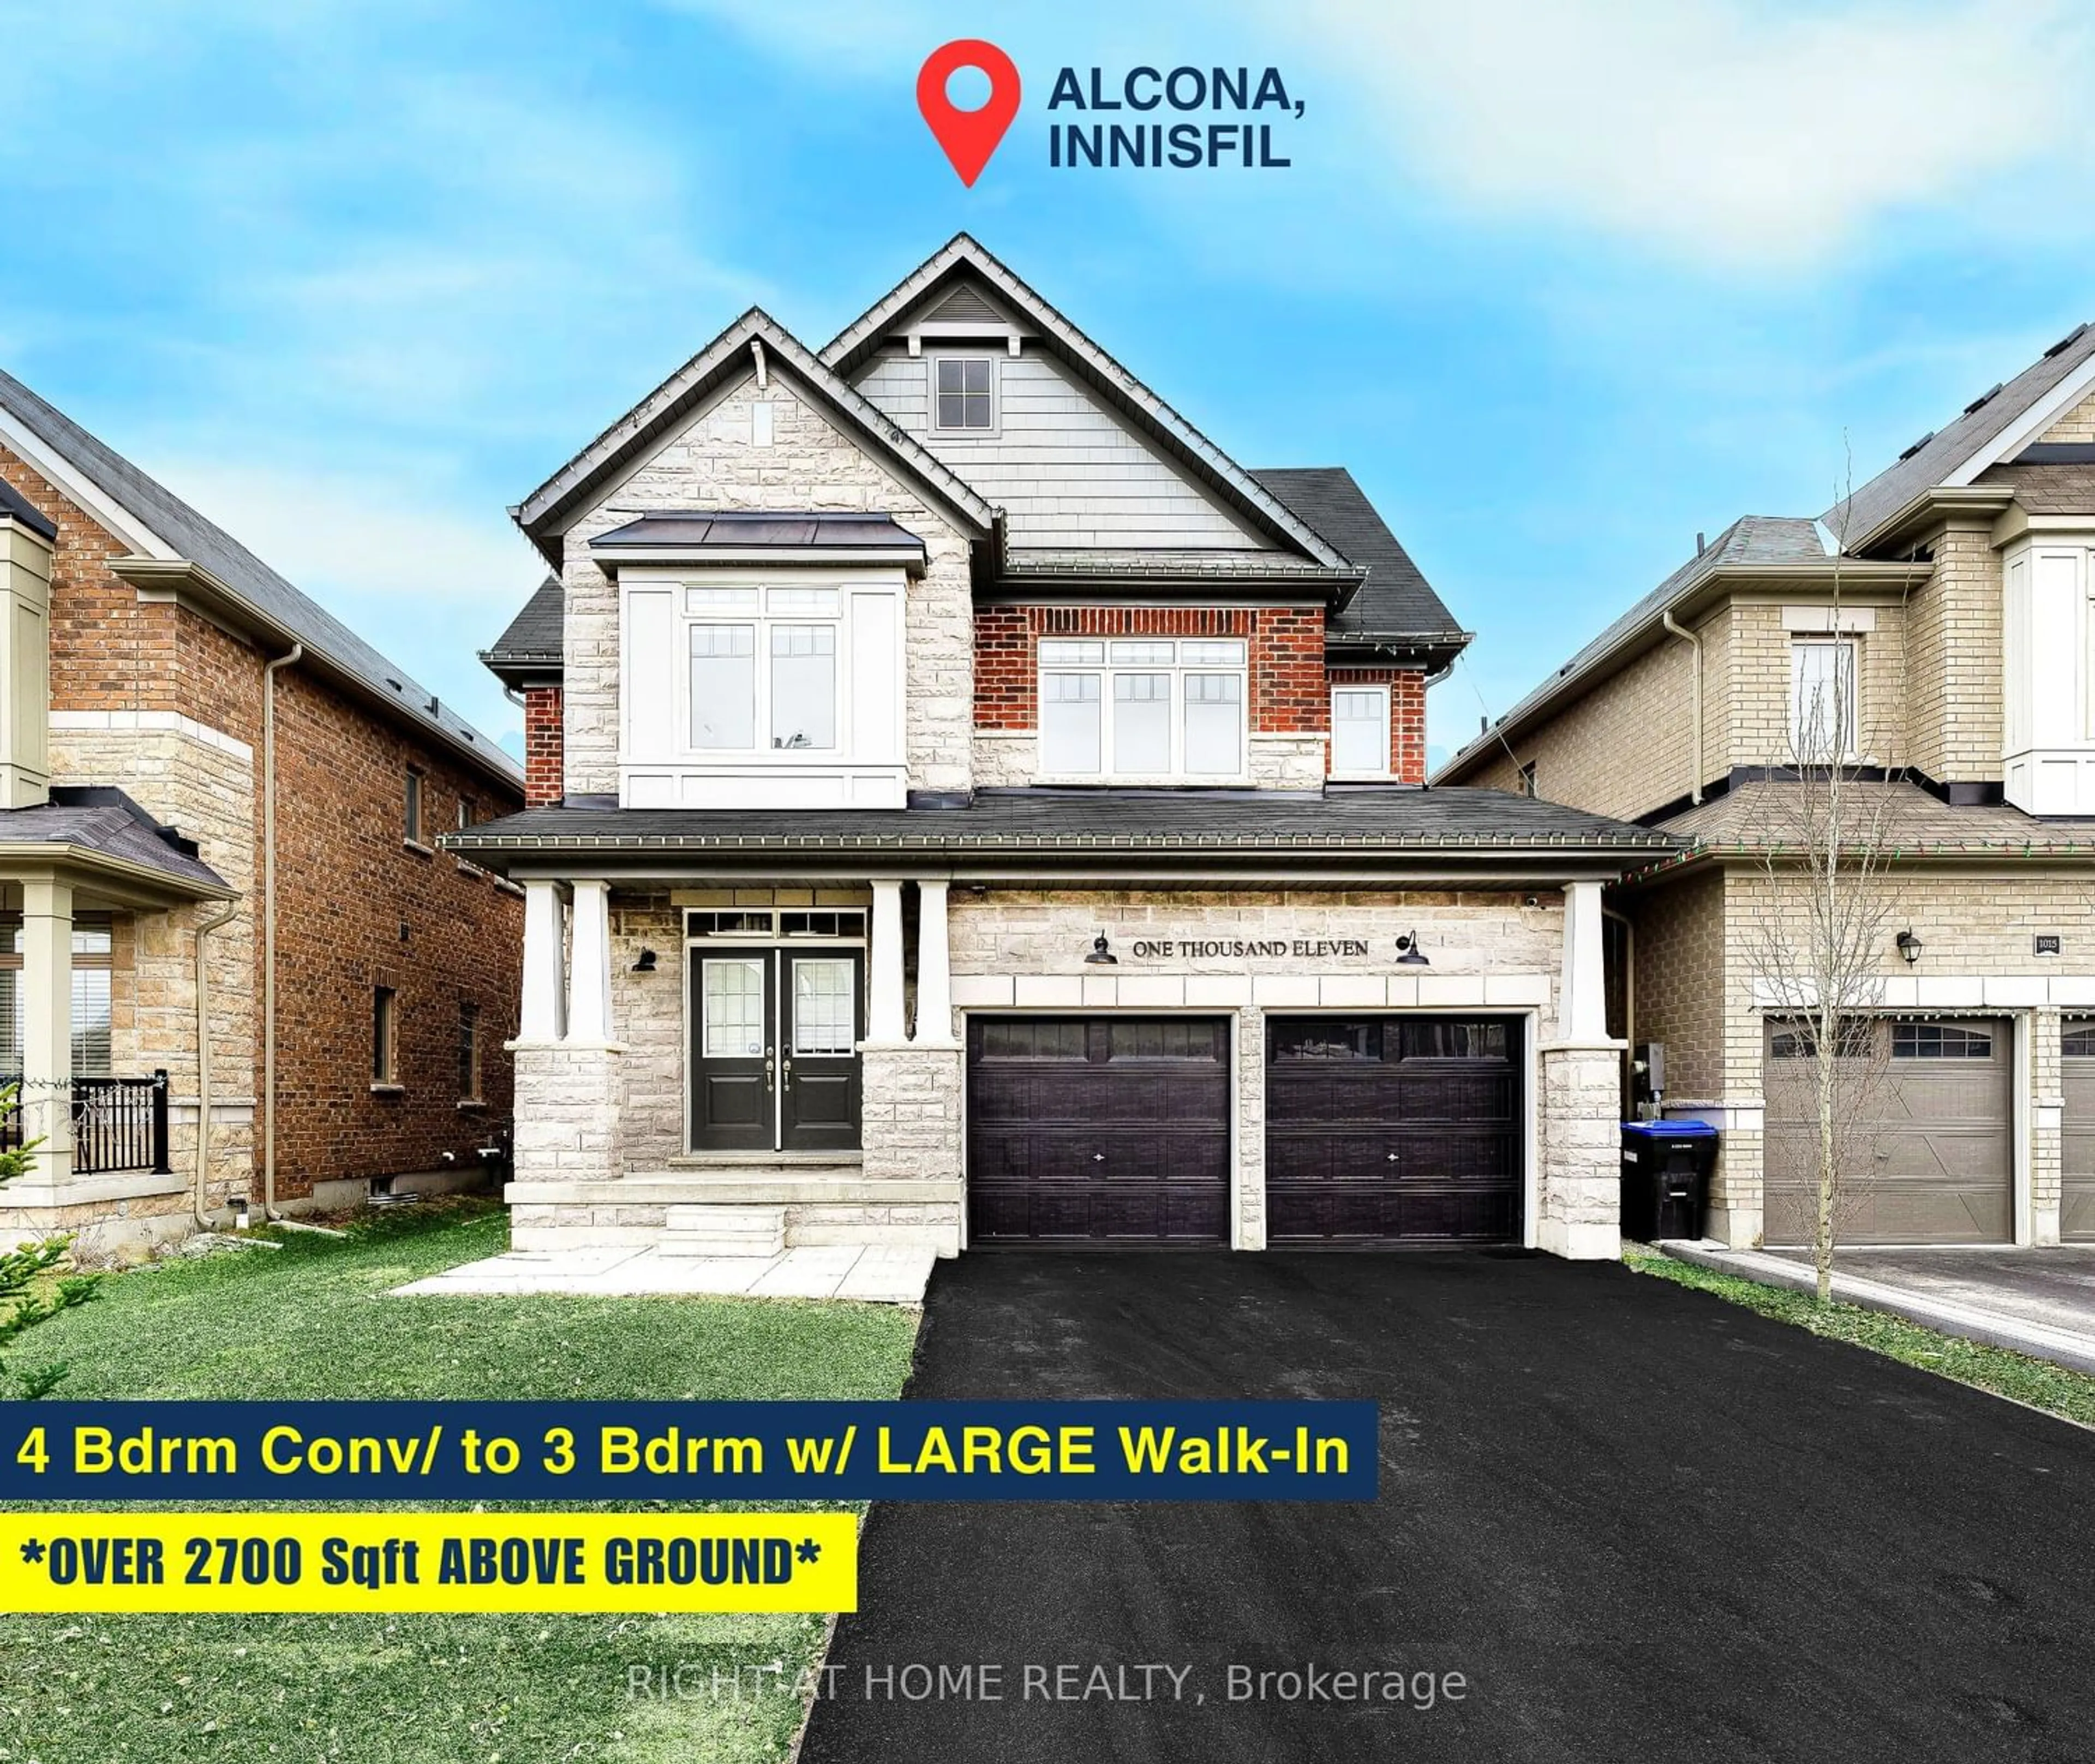 Home with brick exterior material for 1011 Larter St, Innisfil Ontario L9S 0N4